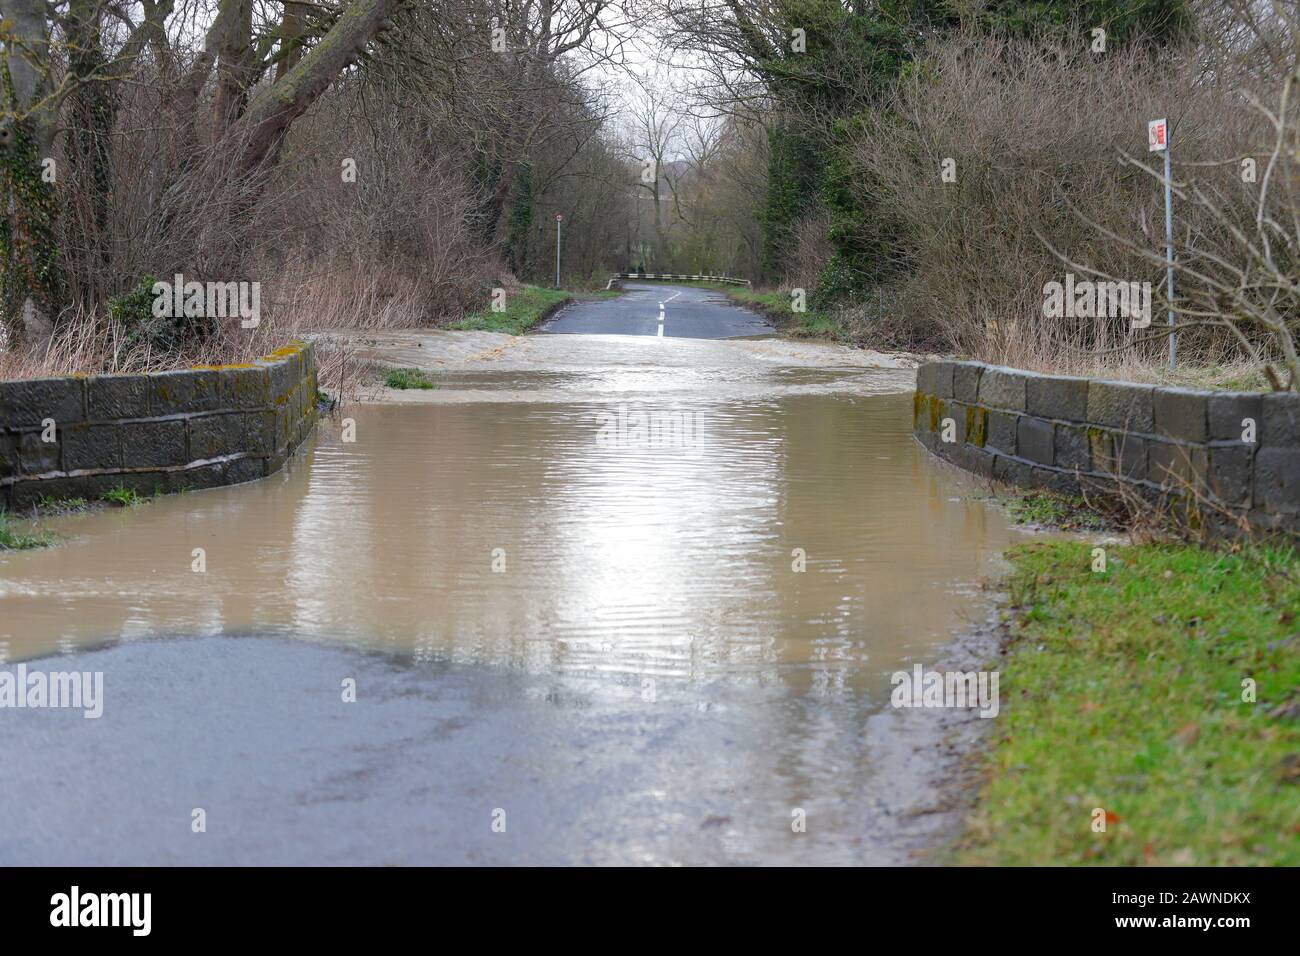 Flooding on Ledston Mill Lane in Ledston, West Yorkshire, after Storm Ciara brought flash flooding throughout the UK. Stock Photo